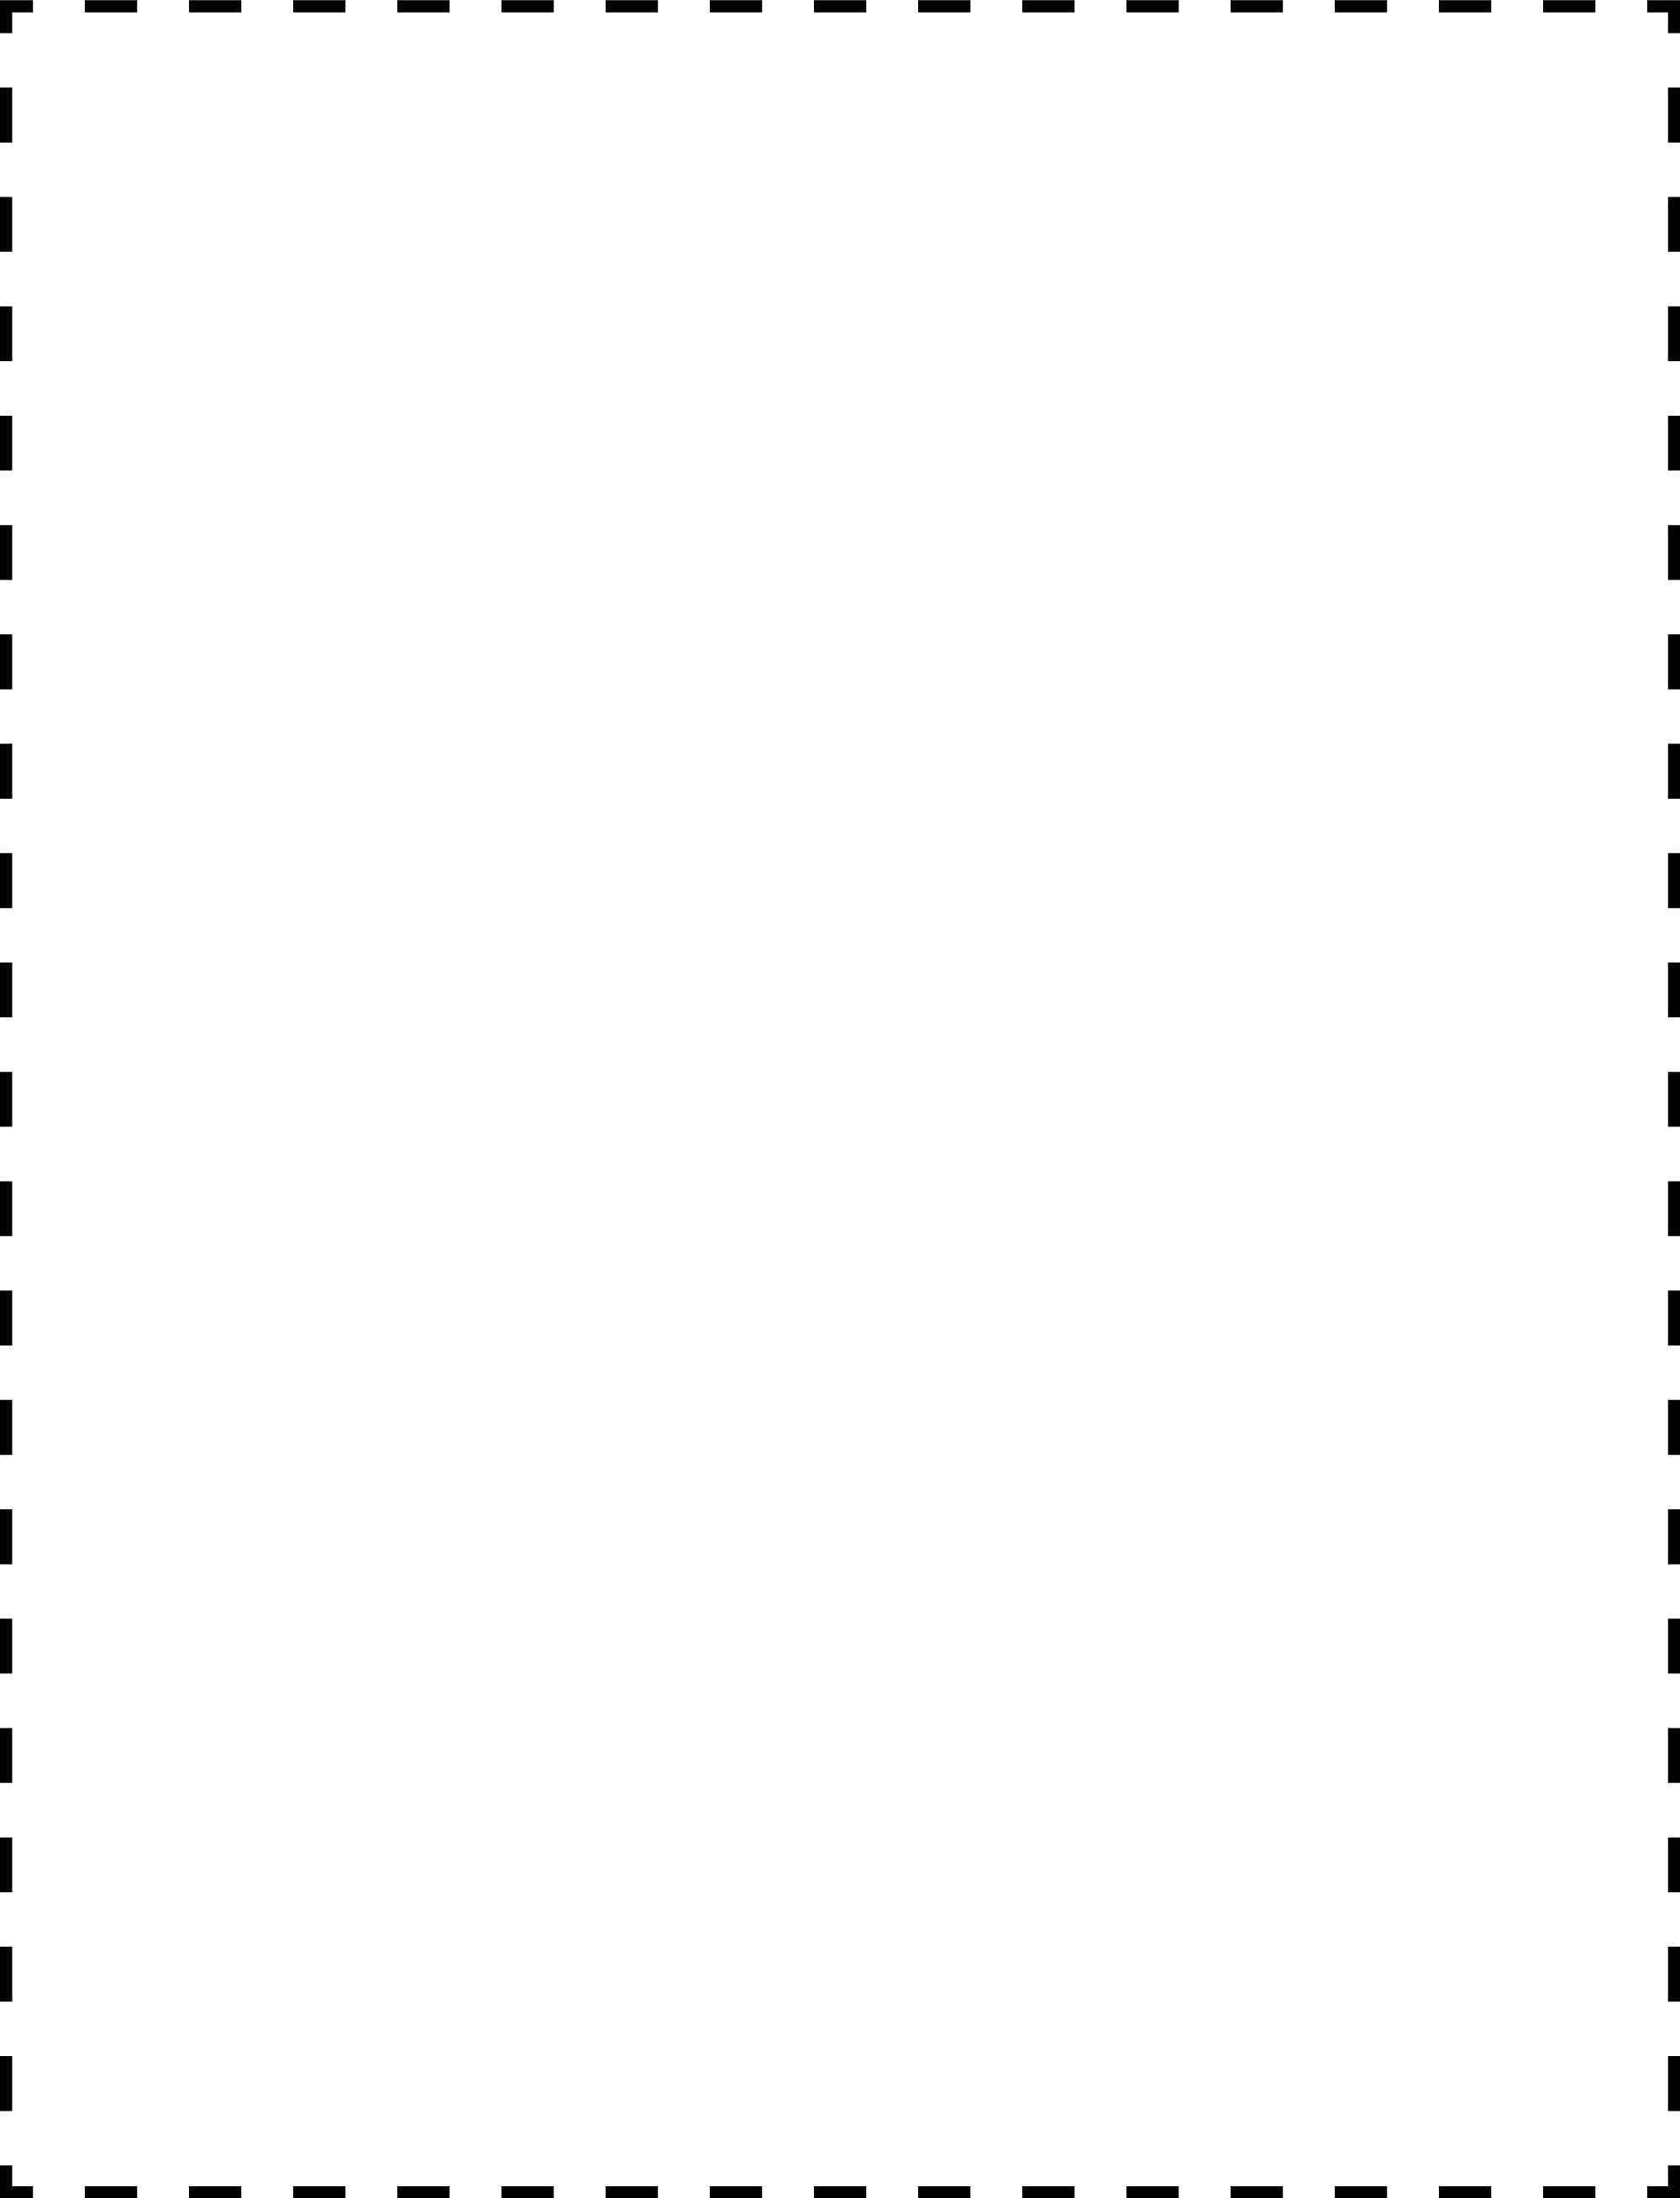 565-2345-coupon-outline-4x5-k.png